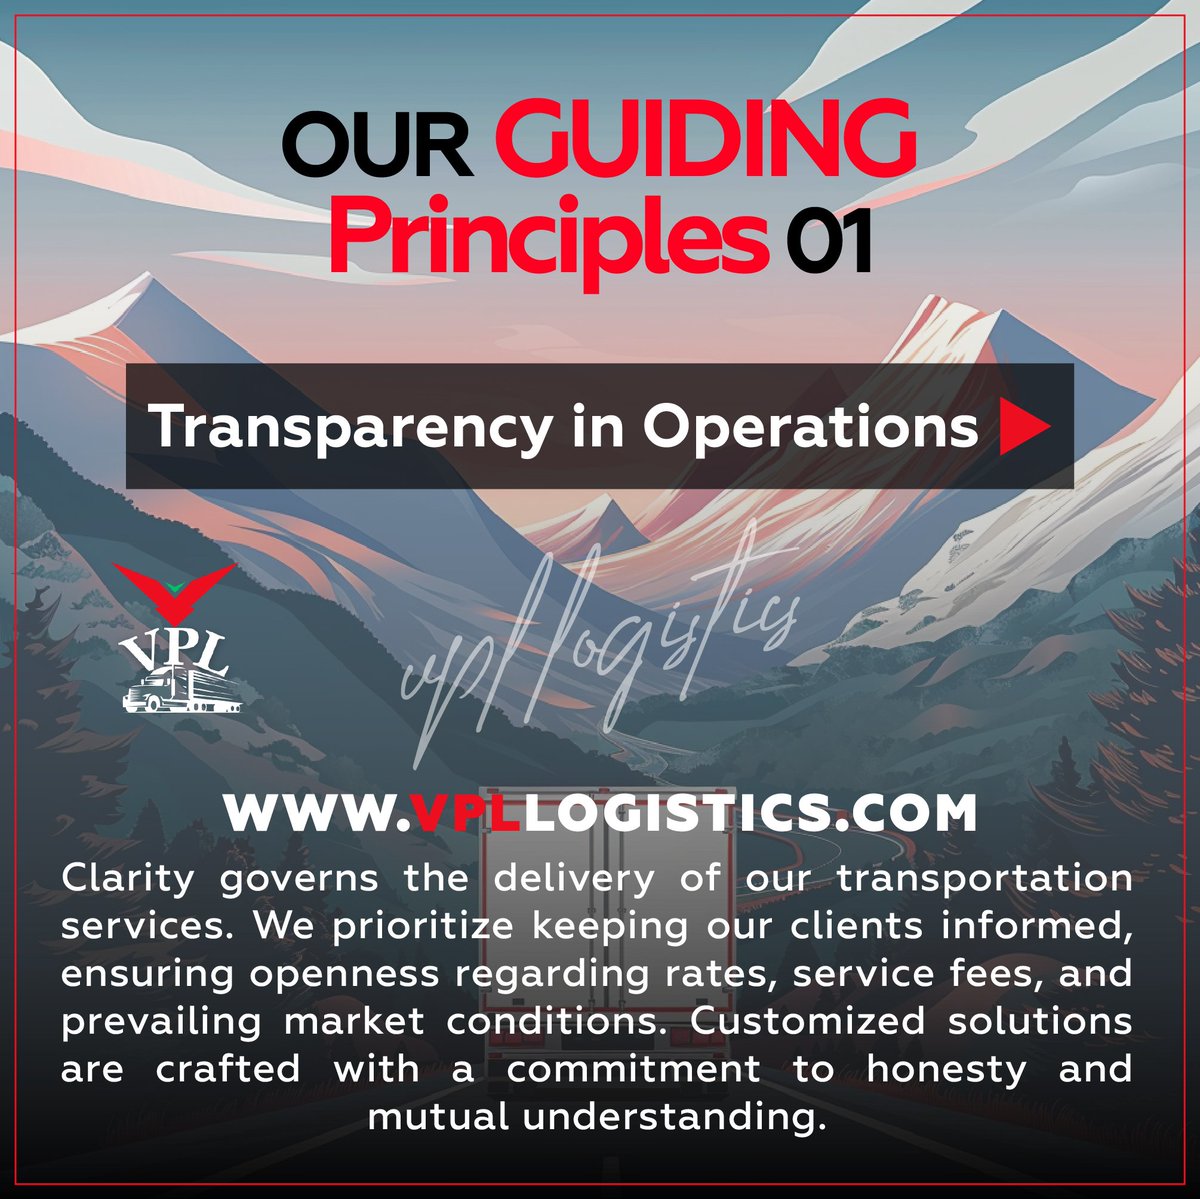 Our Guiding Principles 01

Transparency in Operations

#vpllogistics #freightagent #truckingindustry